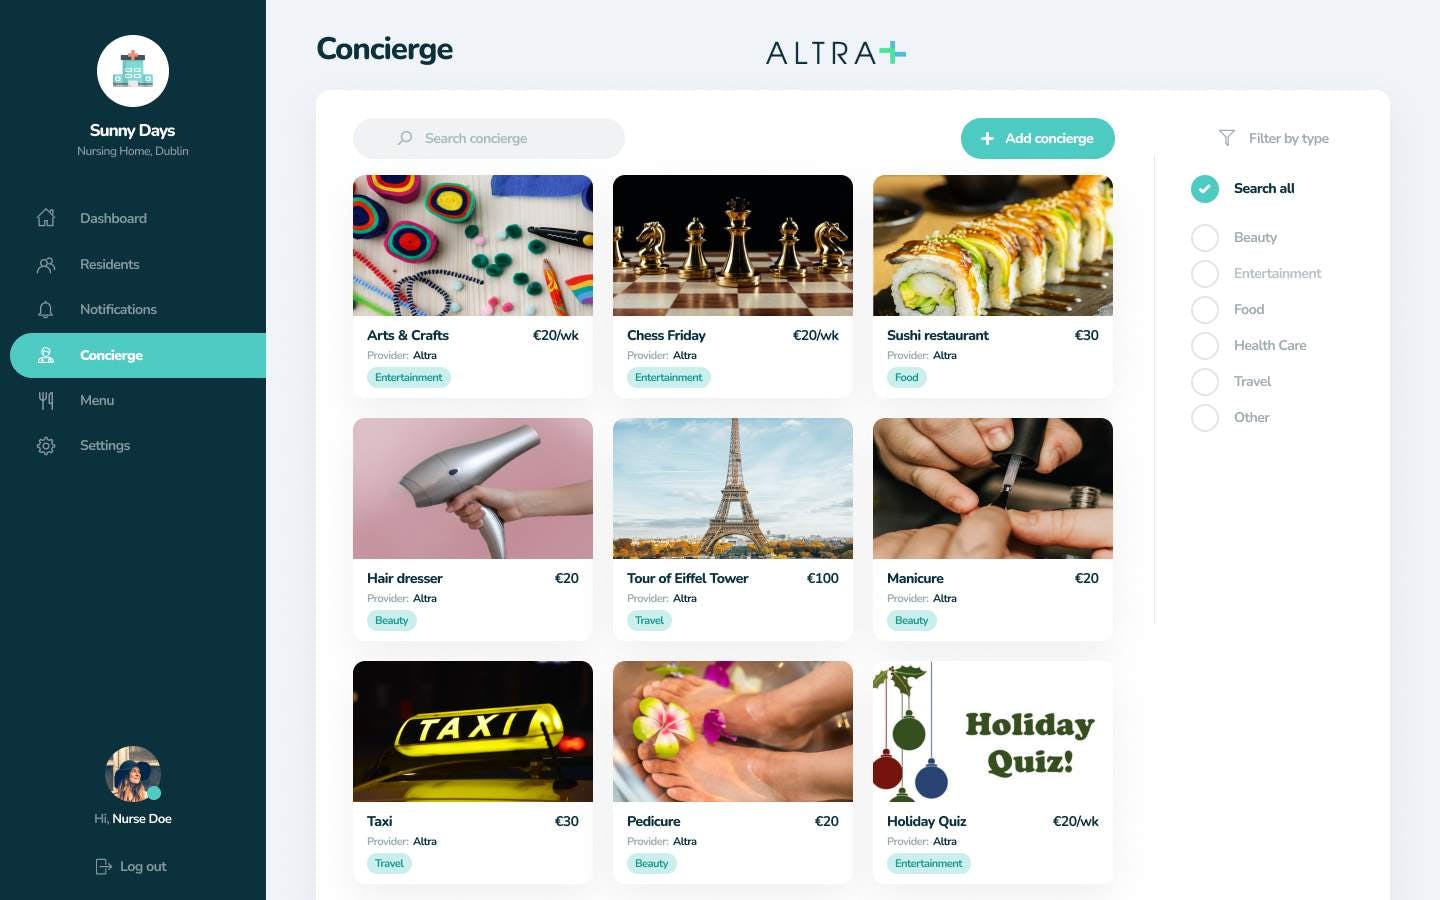 What is the Concierge module?